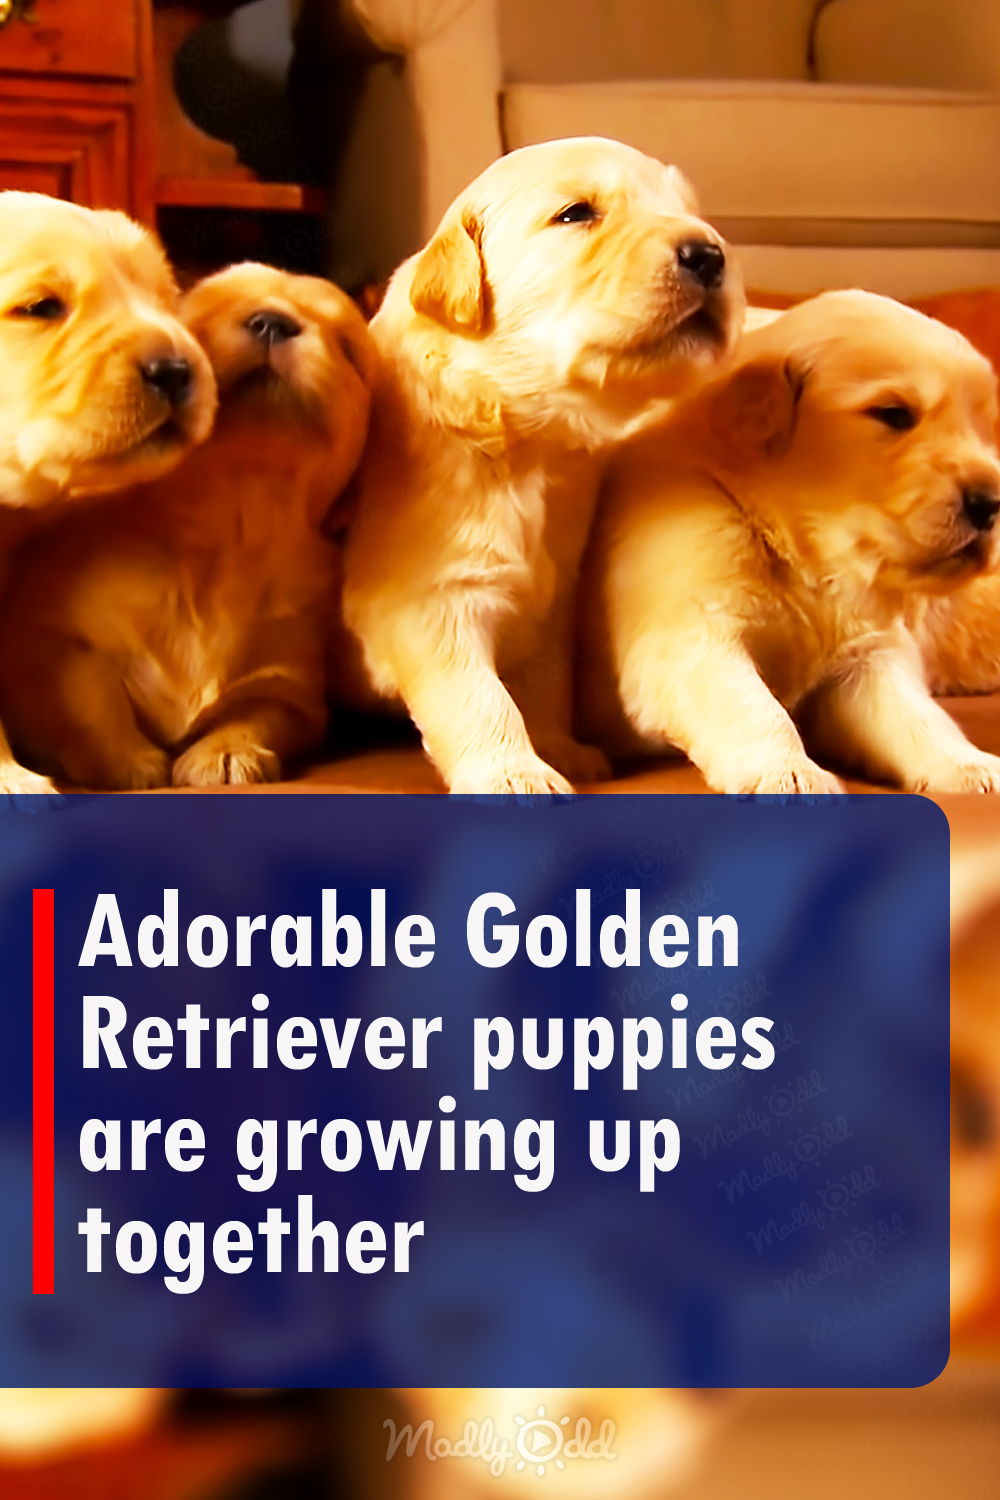 Adorable Golden Retriever puppies are growing up together